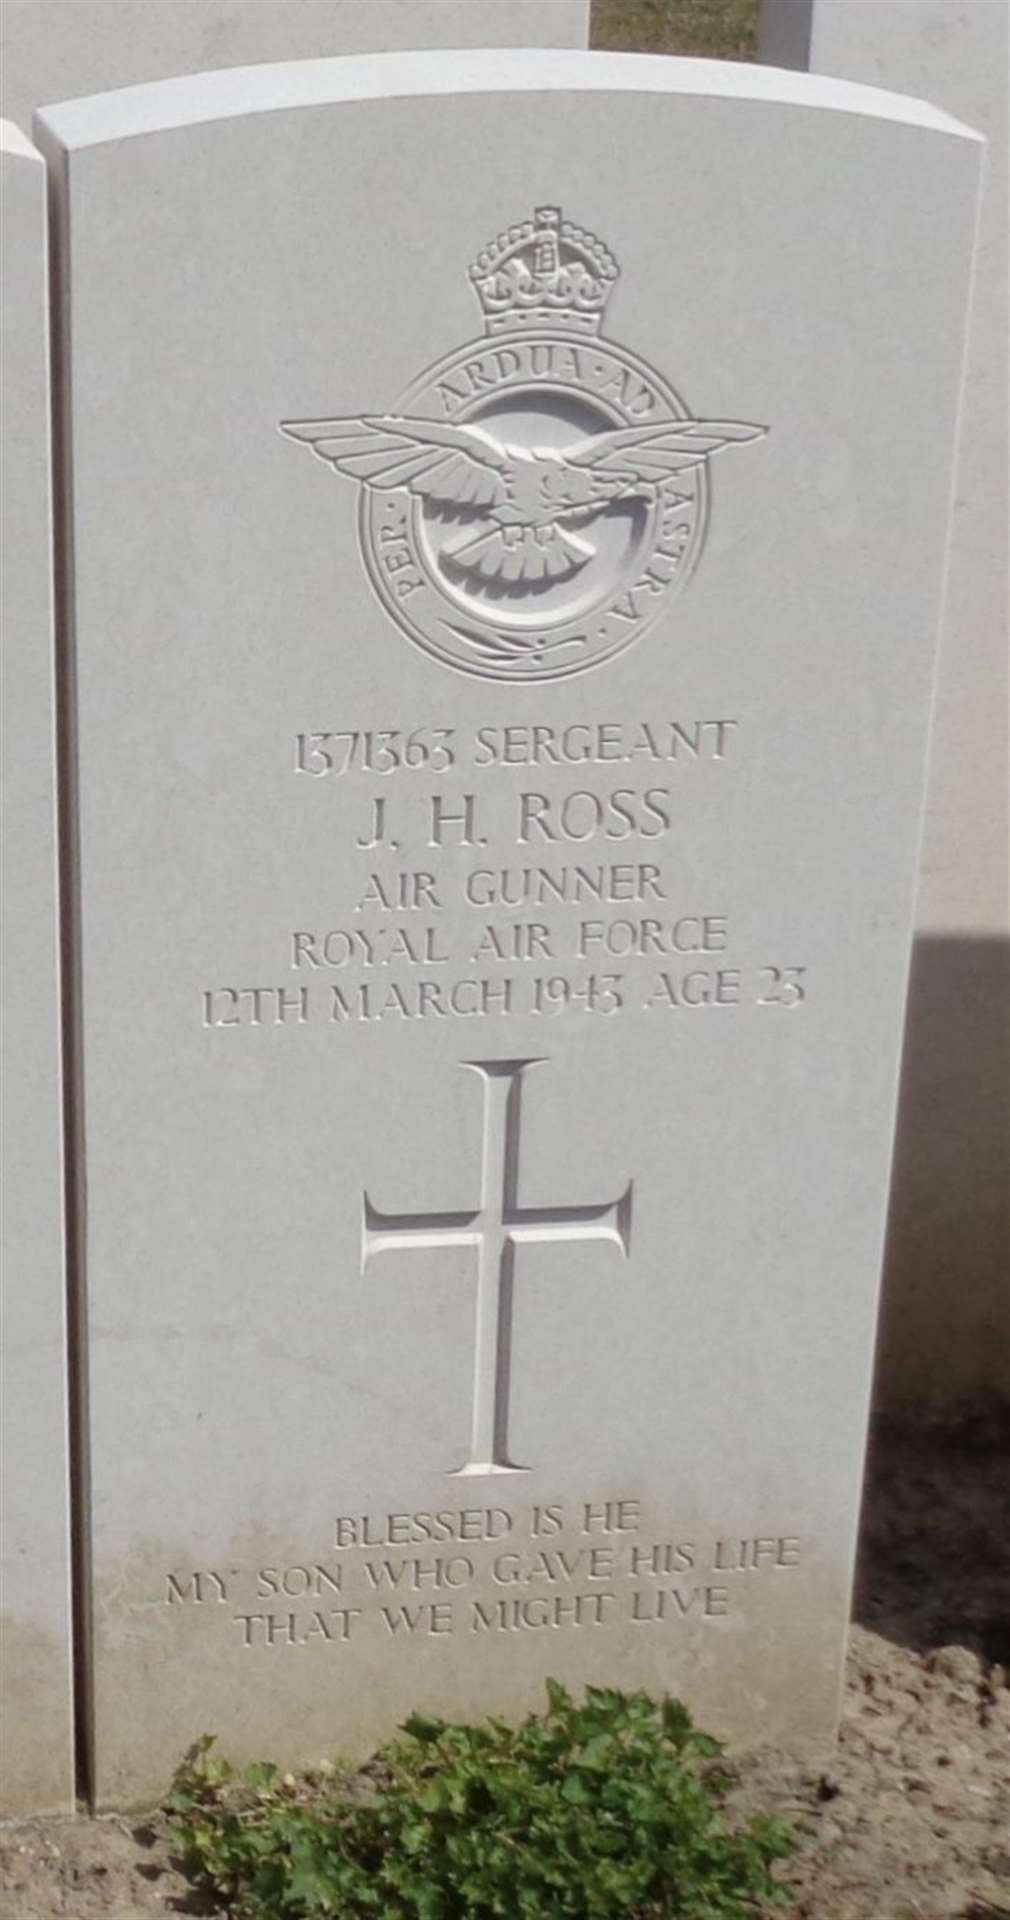 The final resting place of James Hamilton Ross who was just 23 years old when he was killed.